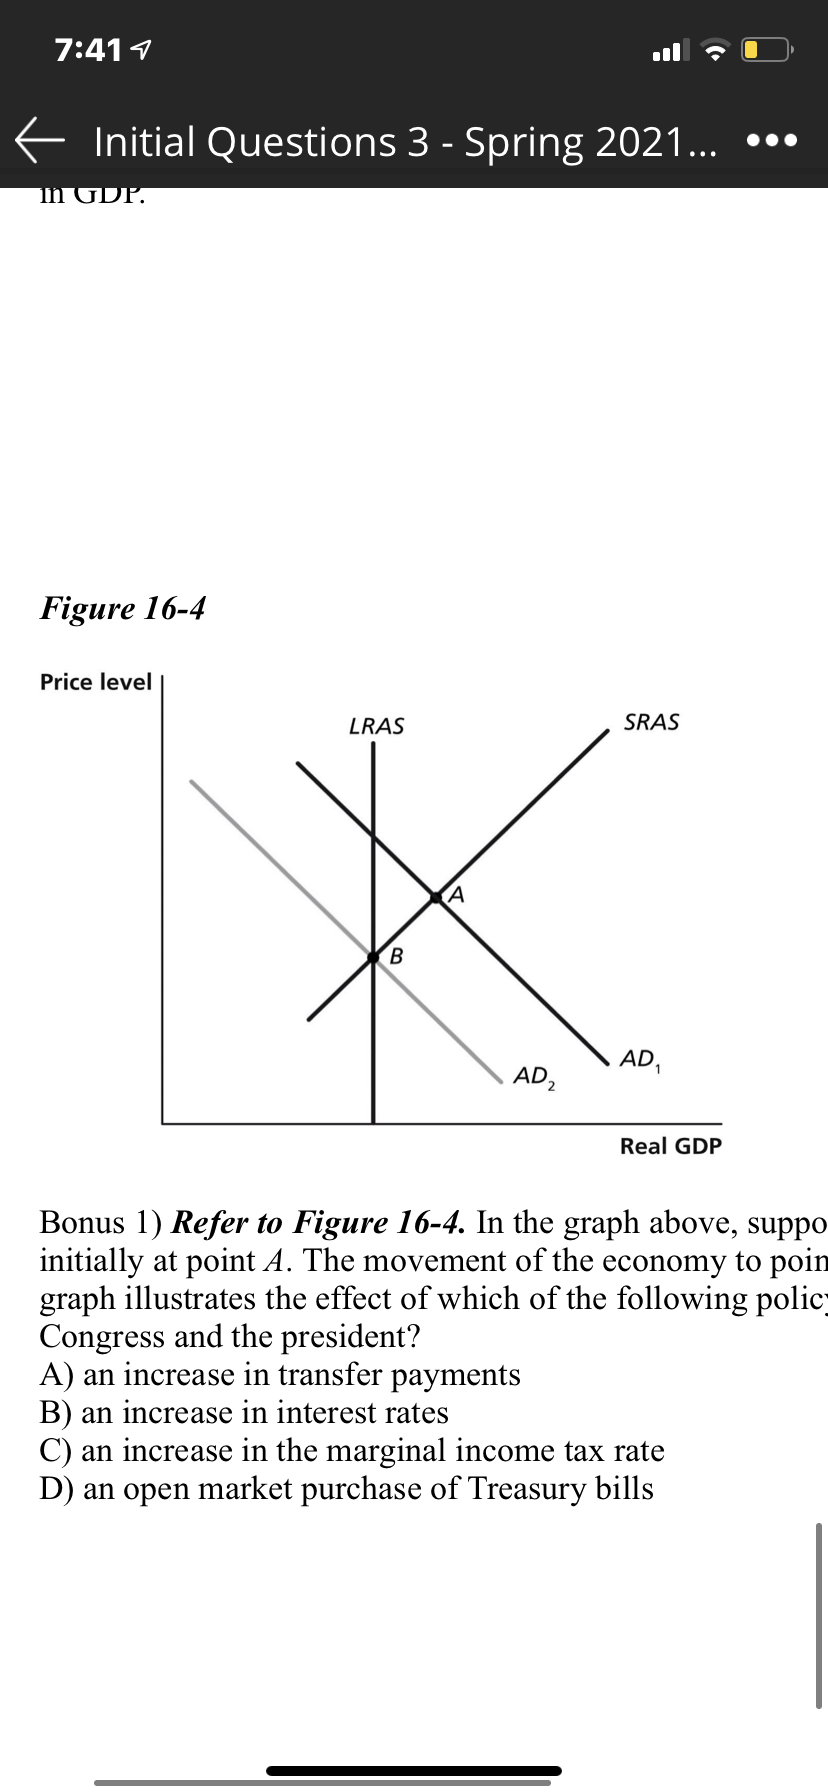 7:411
E Initial Questions 3 - Spring 2021... •••
In GDP.
Figure 16-4
Price level
SRAS
LRAS
AD,
AD2
Real GDP
Bonus 1) Refer to Figure 16-4. In the graph above, suppo
initially at point A. The movement of the economy to poin
graph illustrates the effect of which of the following polic
Congress and the president?
A) an increase in transfer payments
B) an increase in interest rates
C) an increase in the marginal income tax rate
D) an open market purchase of Treasury bills
